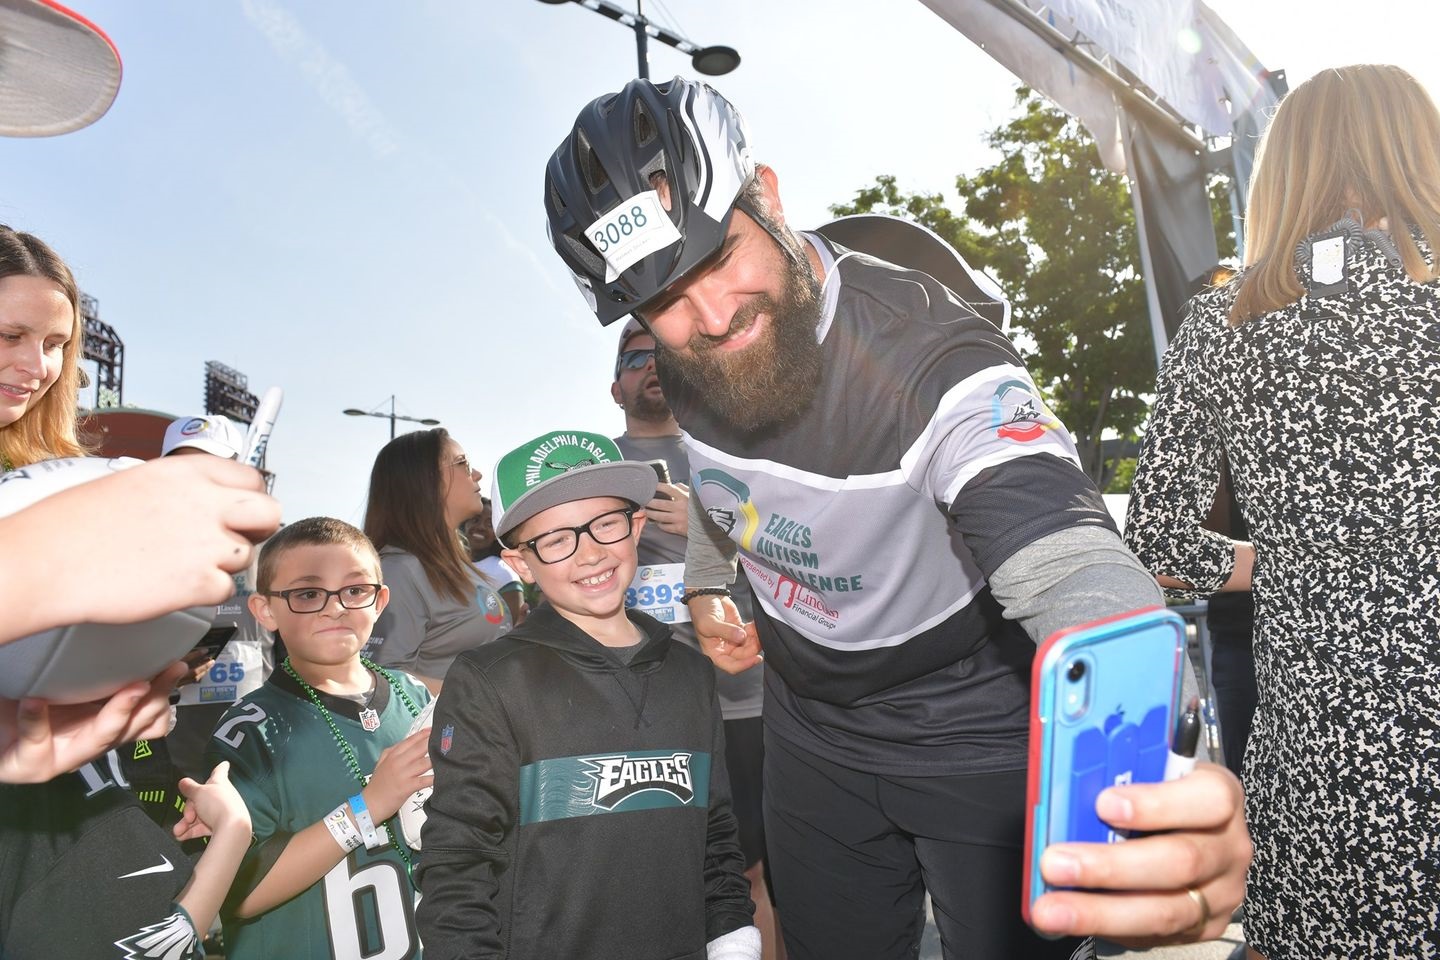 Jason Kelce to Appear at Ocean Drive for Autism Awareness Fundraiser | Sea Isle News